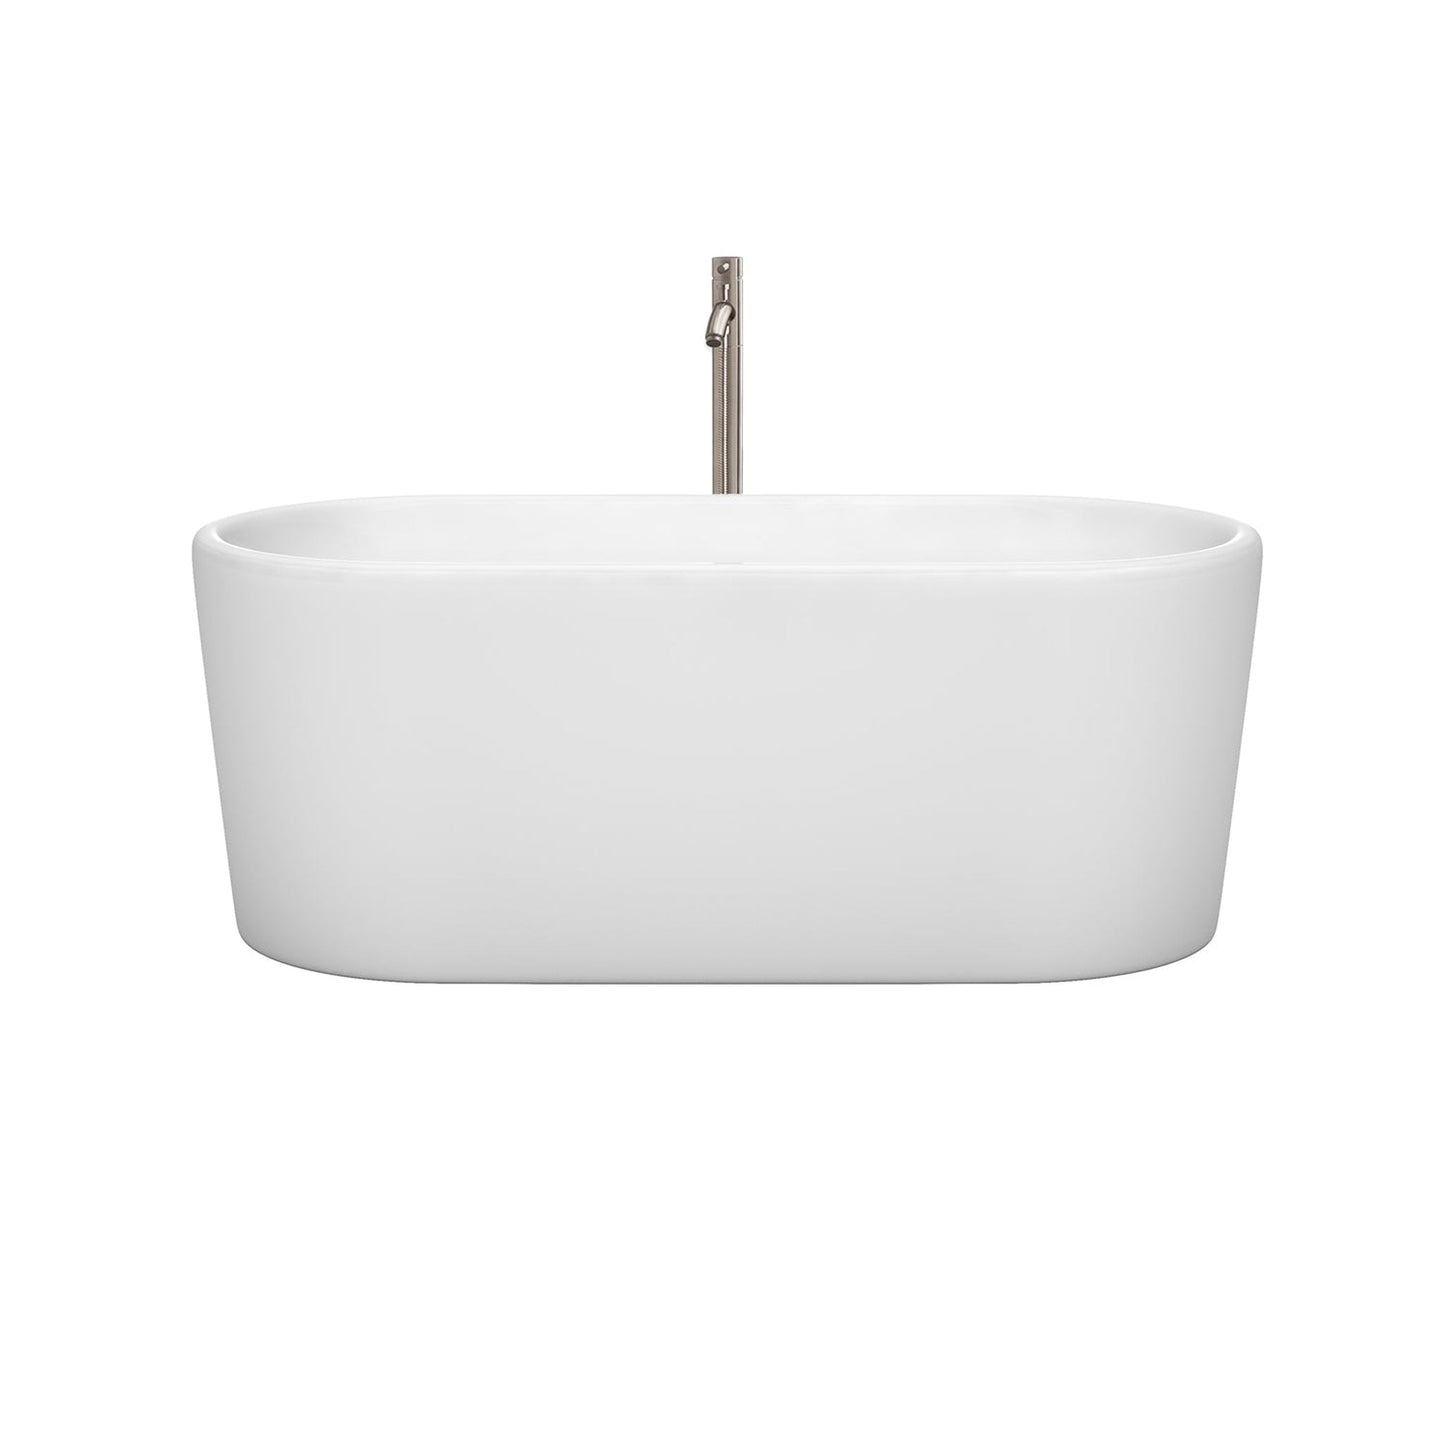 Wyndham Collection Ursula 59" Freestanding Bathtub in White With Floor Mounted Faucet, Drain and Overflow Trim in Brushed Nickel